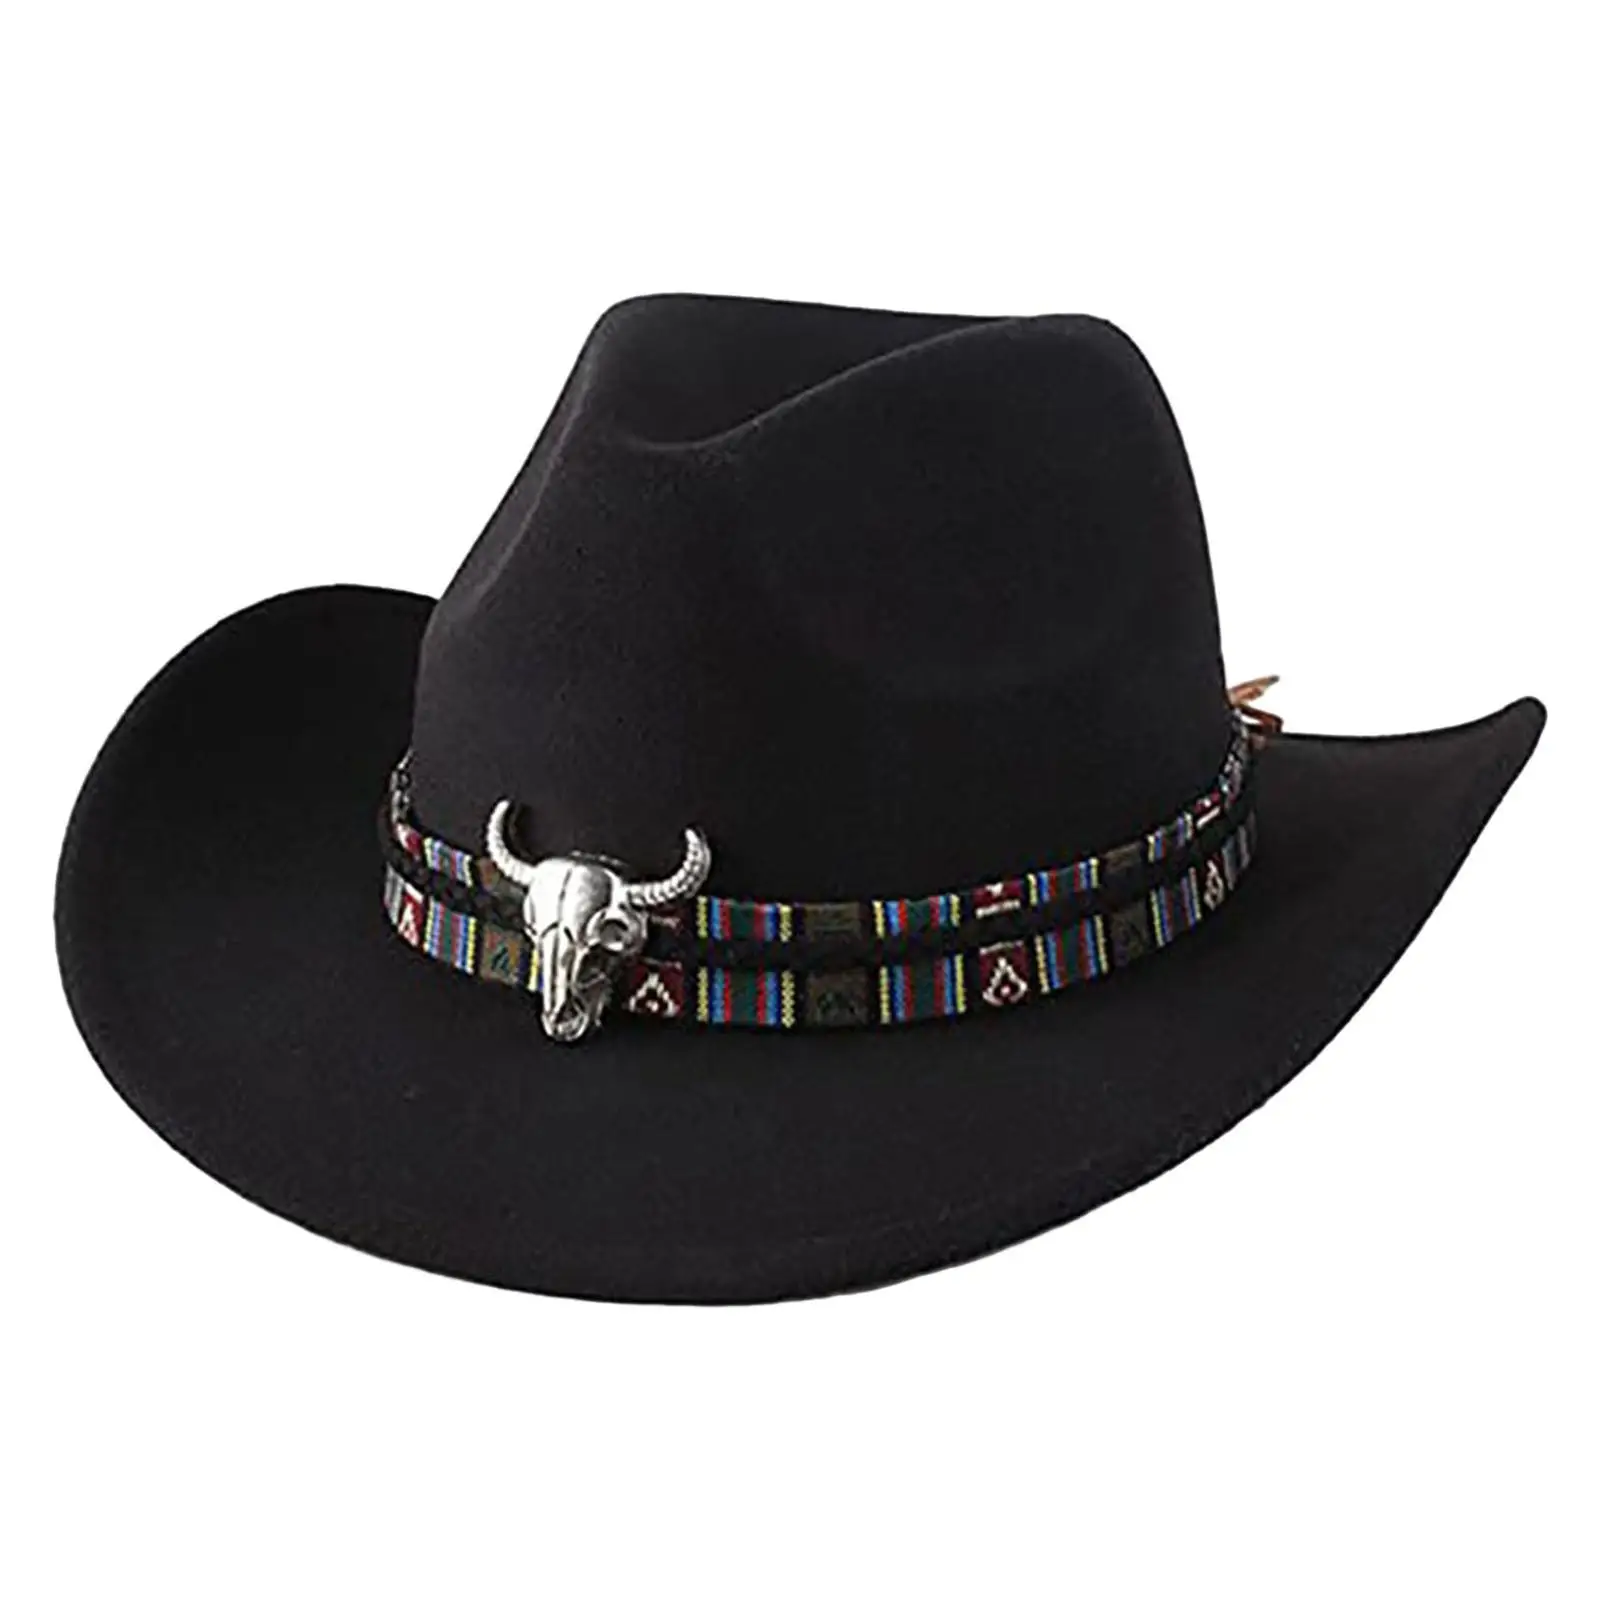 Cowgirl Hat Comfortable with Pull On Closure Trendy black for Autumn